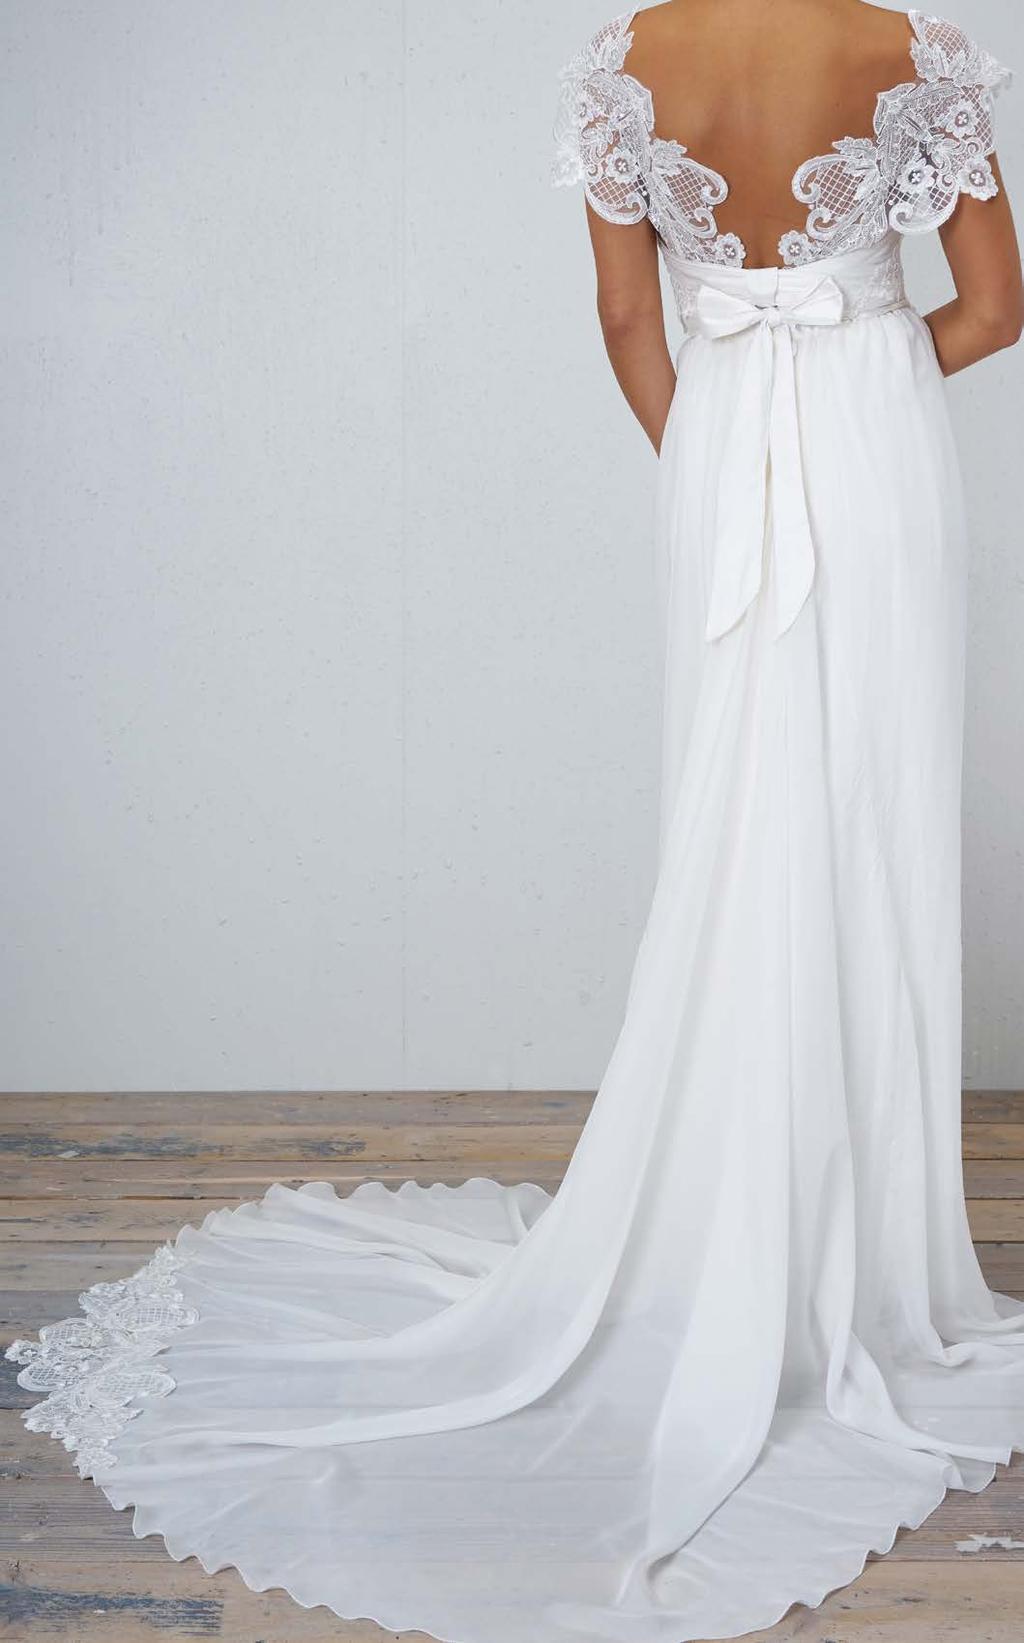 elegance and comfortable but classic bridal styling.